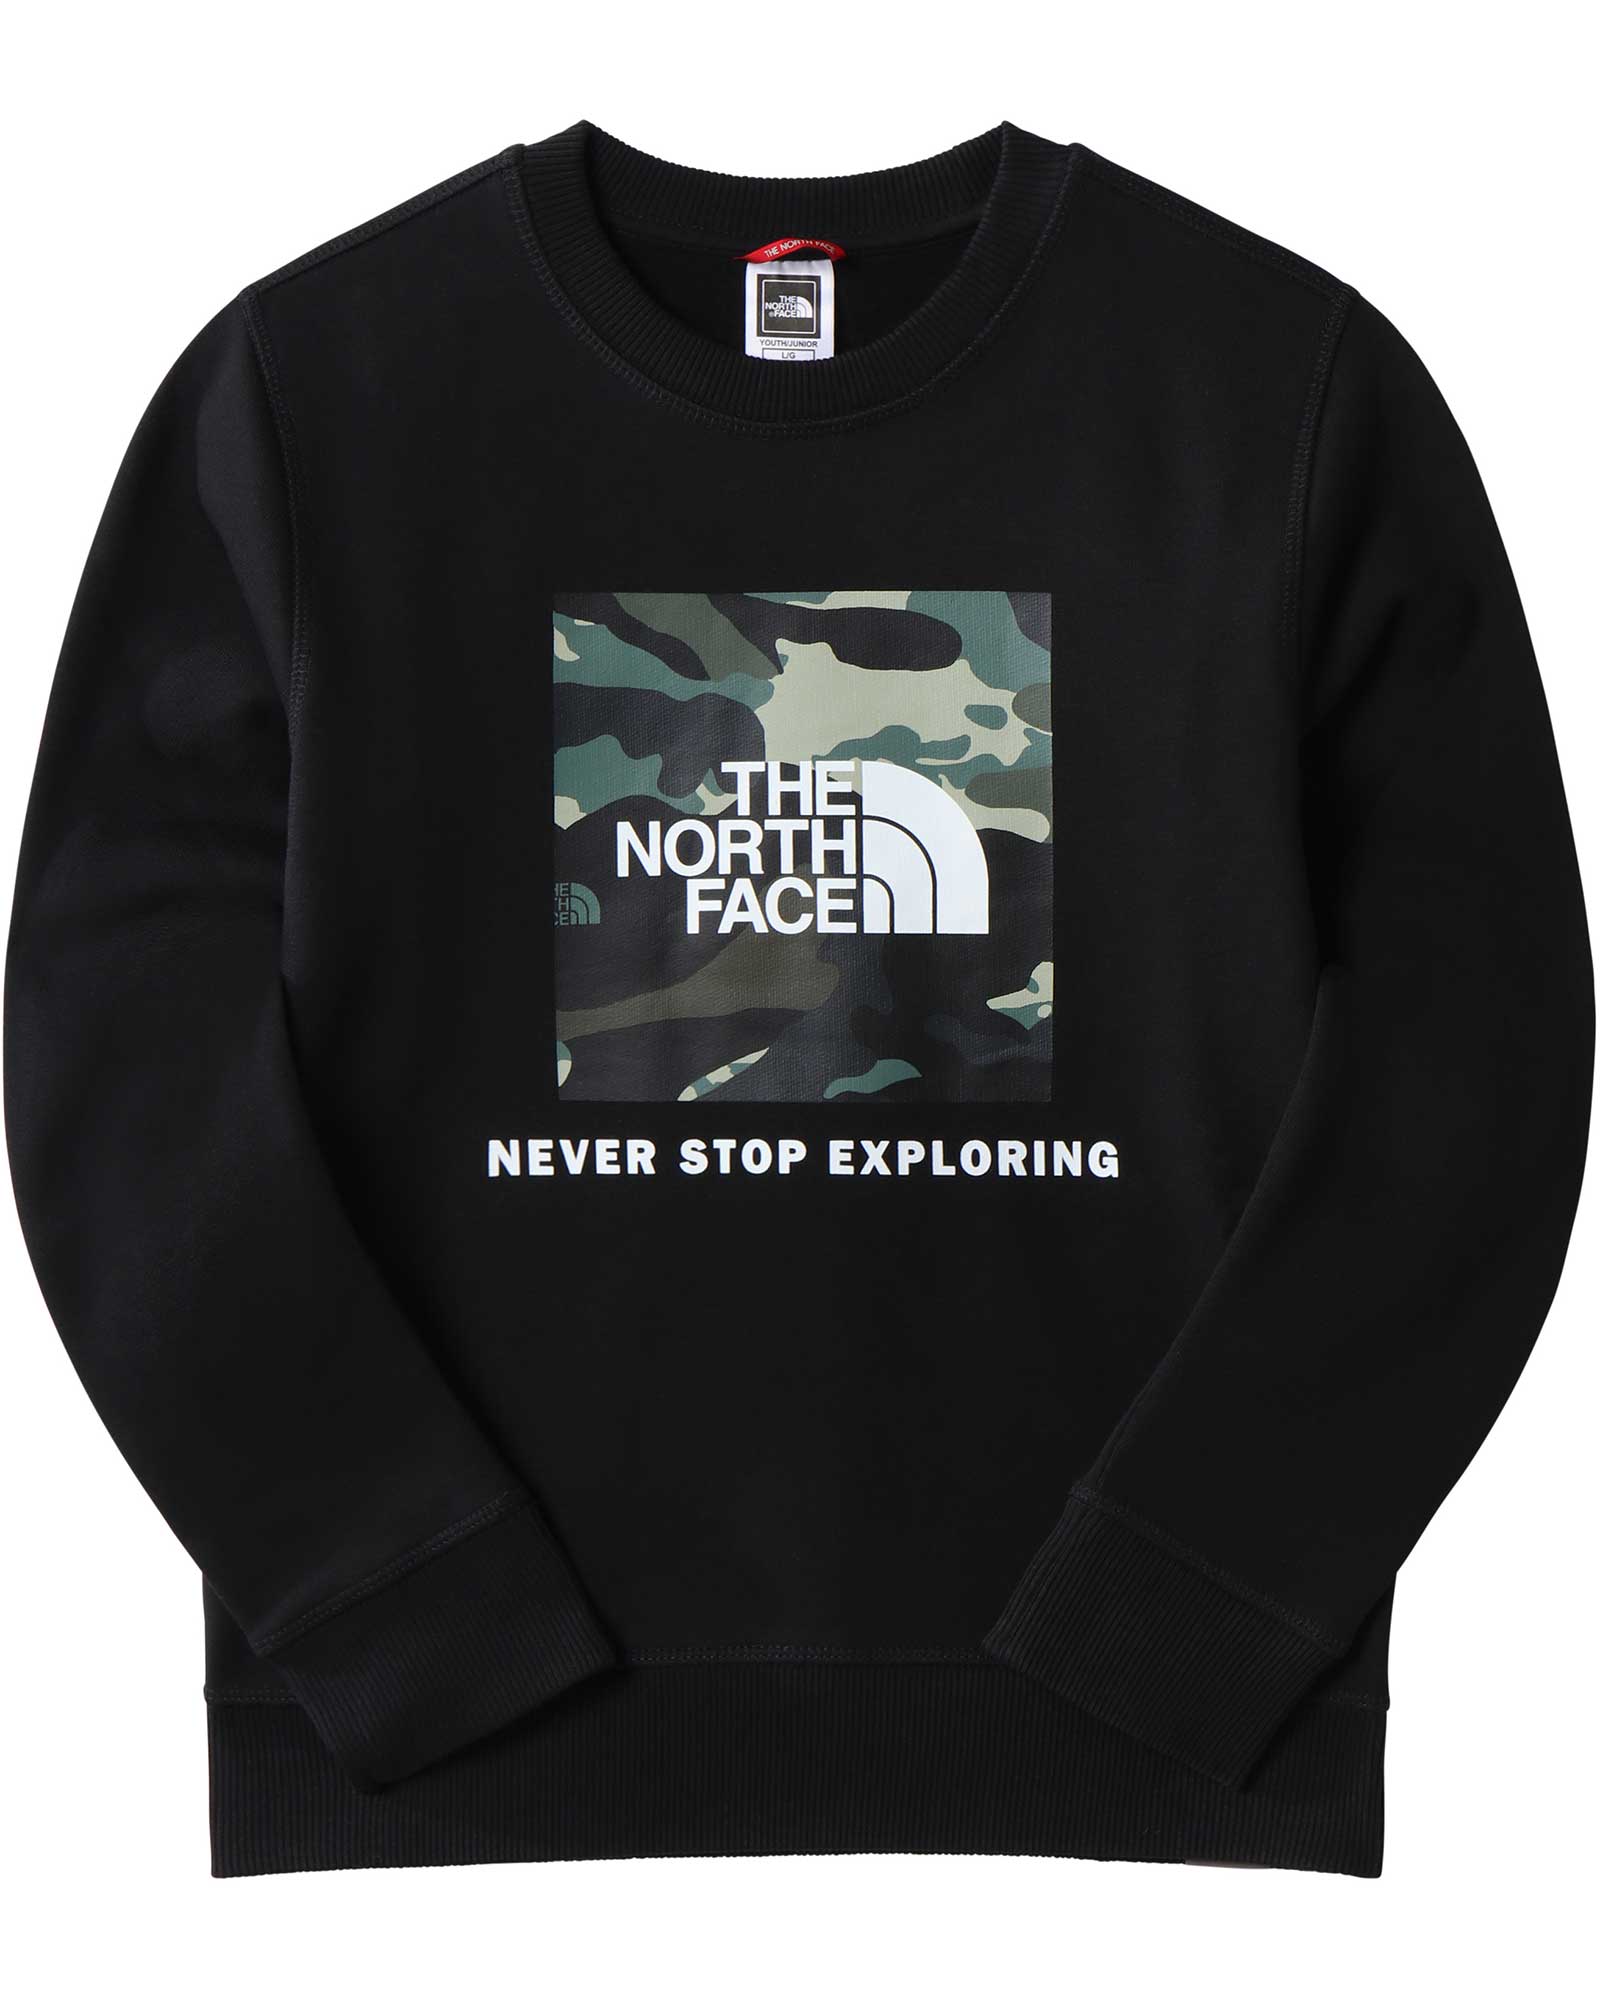 Product image of The North Face Box Kids' Crew